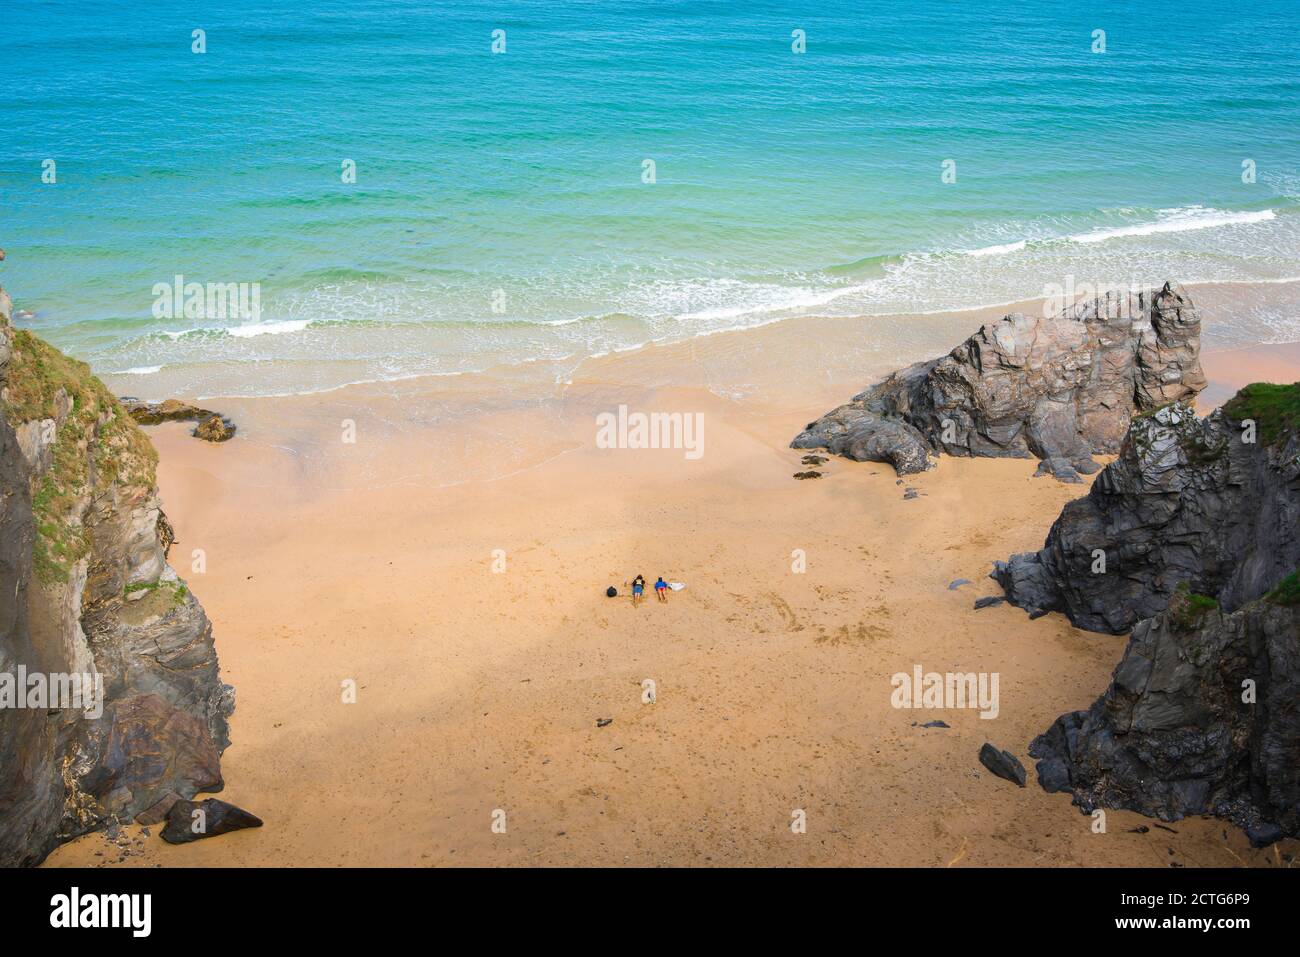 Couple beach alone, view of a young couple alone lying on an empty beach in Cornwall, England, UK. Stock Photo